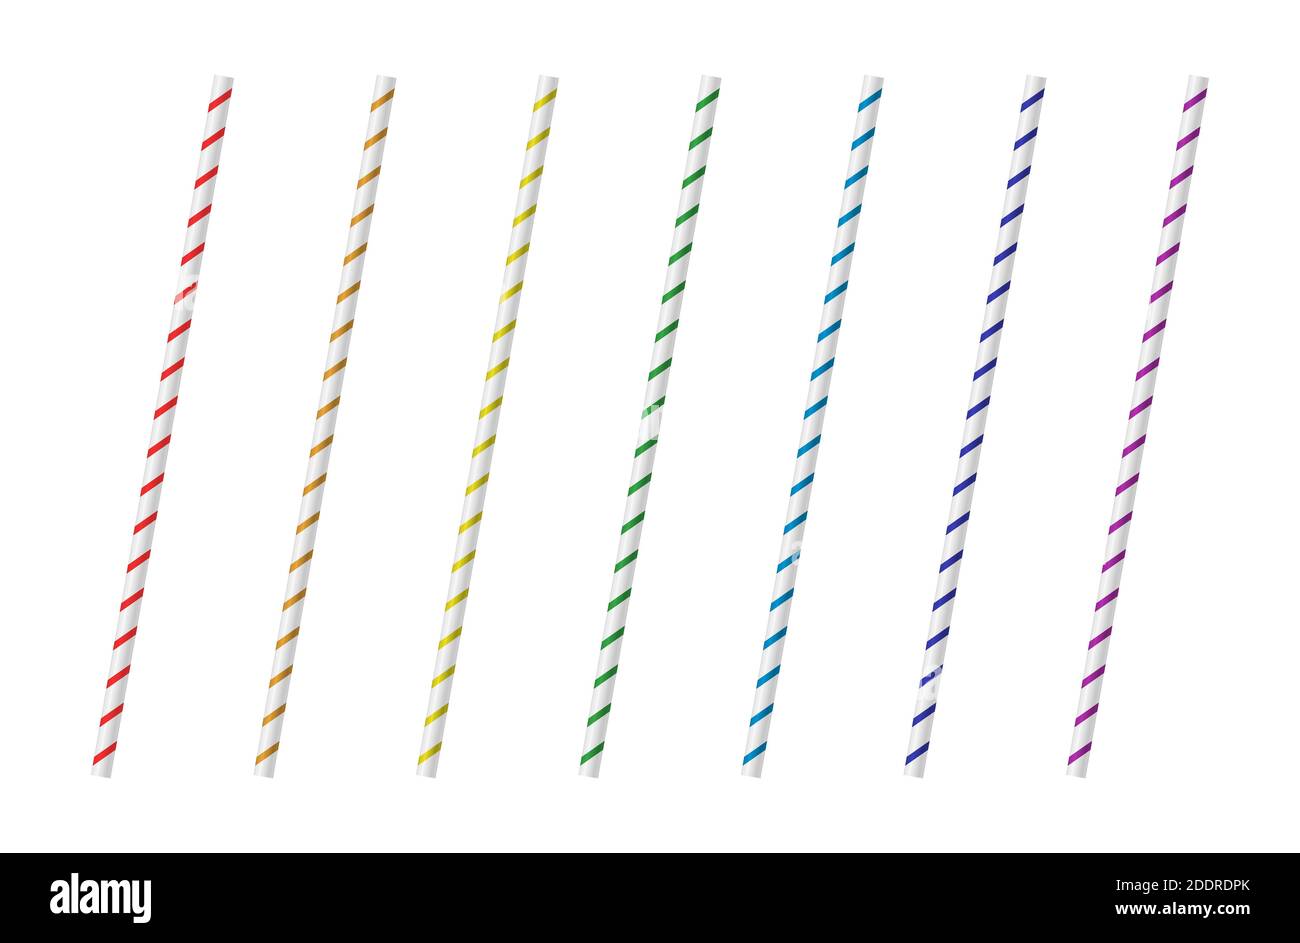 Vector realistic drinking straws for milk drinks, cocktails or alcohol. Set of white, red, orange, yellow, blue, green, purple drinking straws isolate Stock Vector